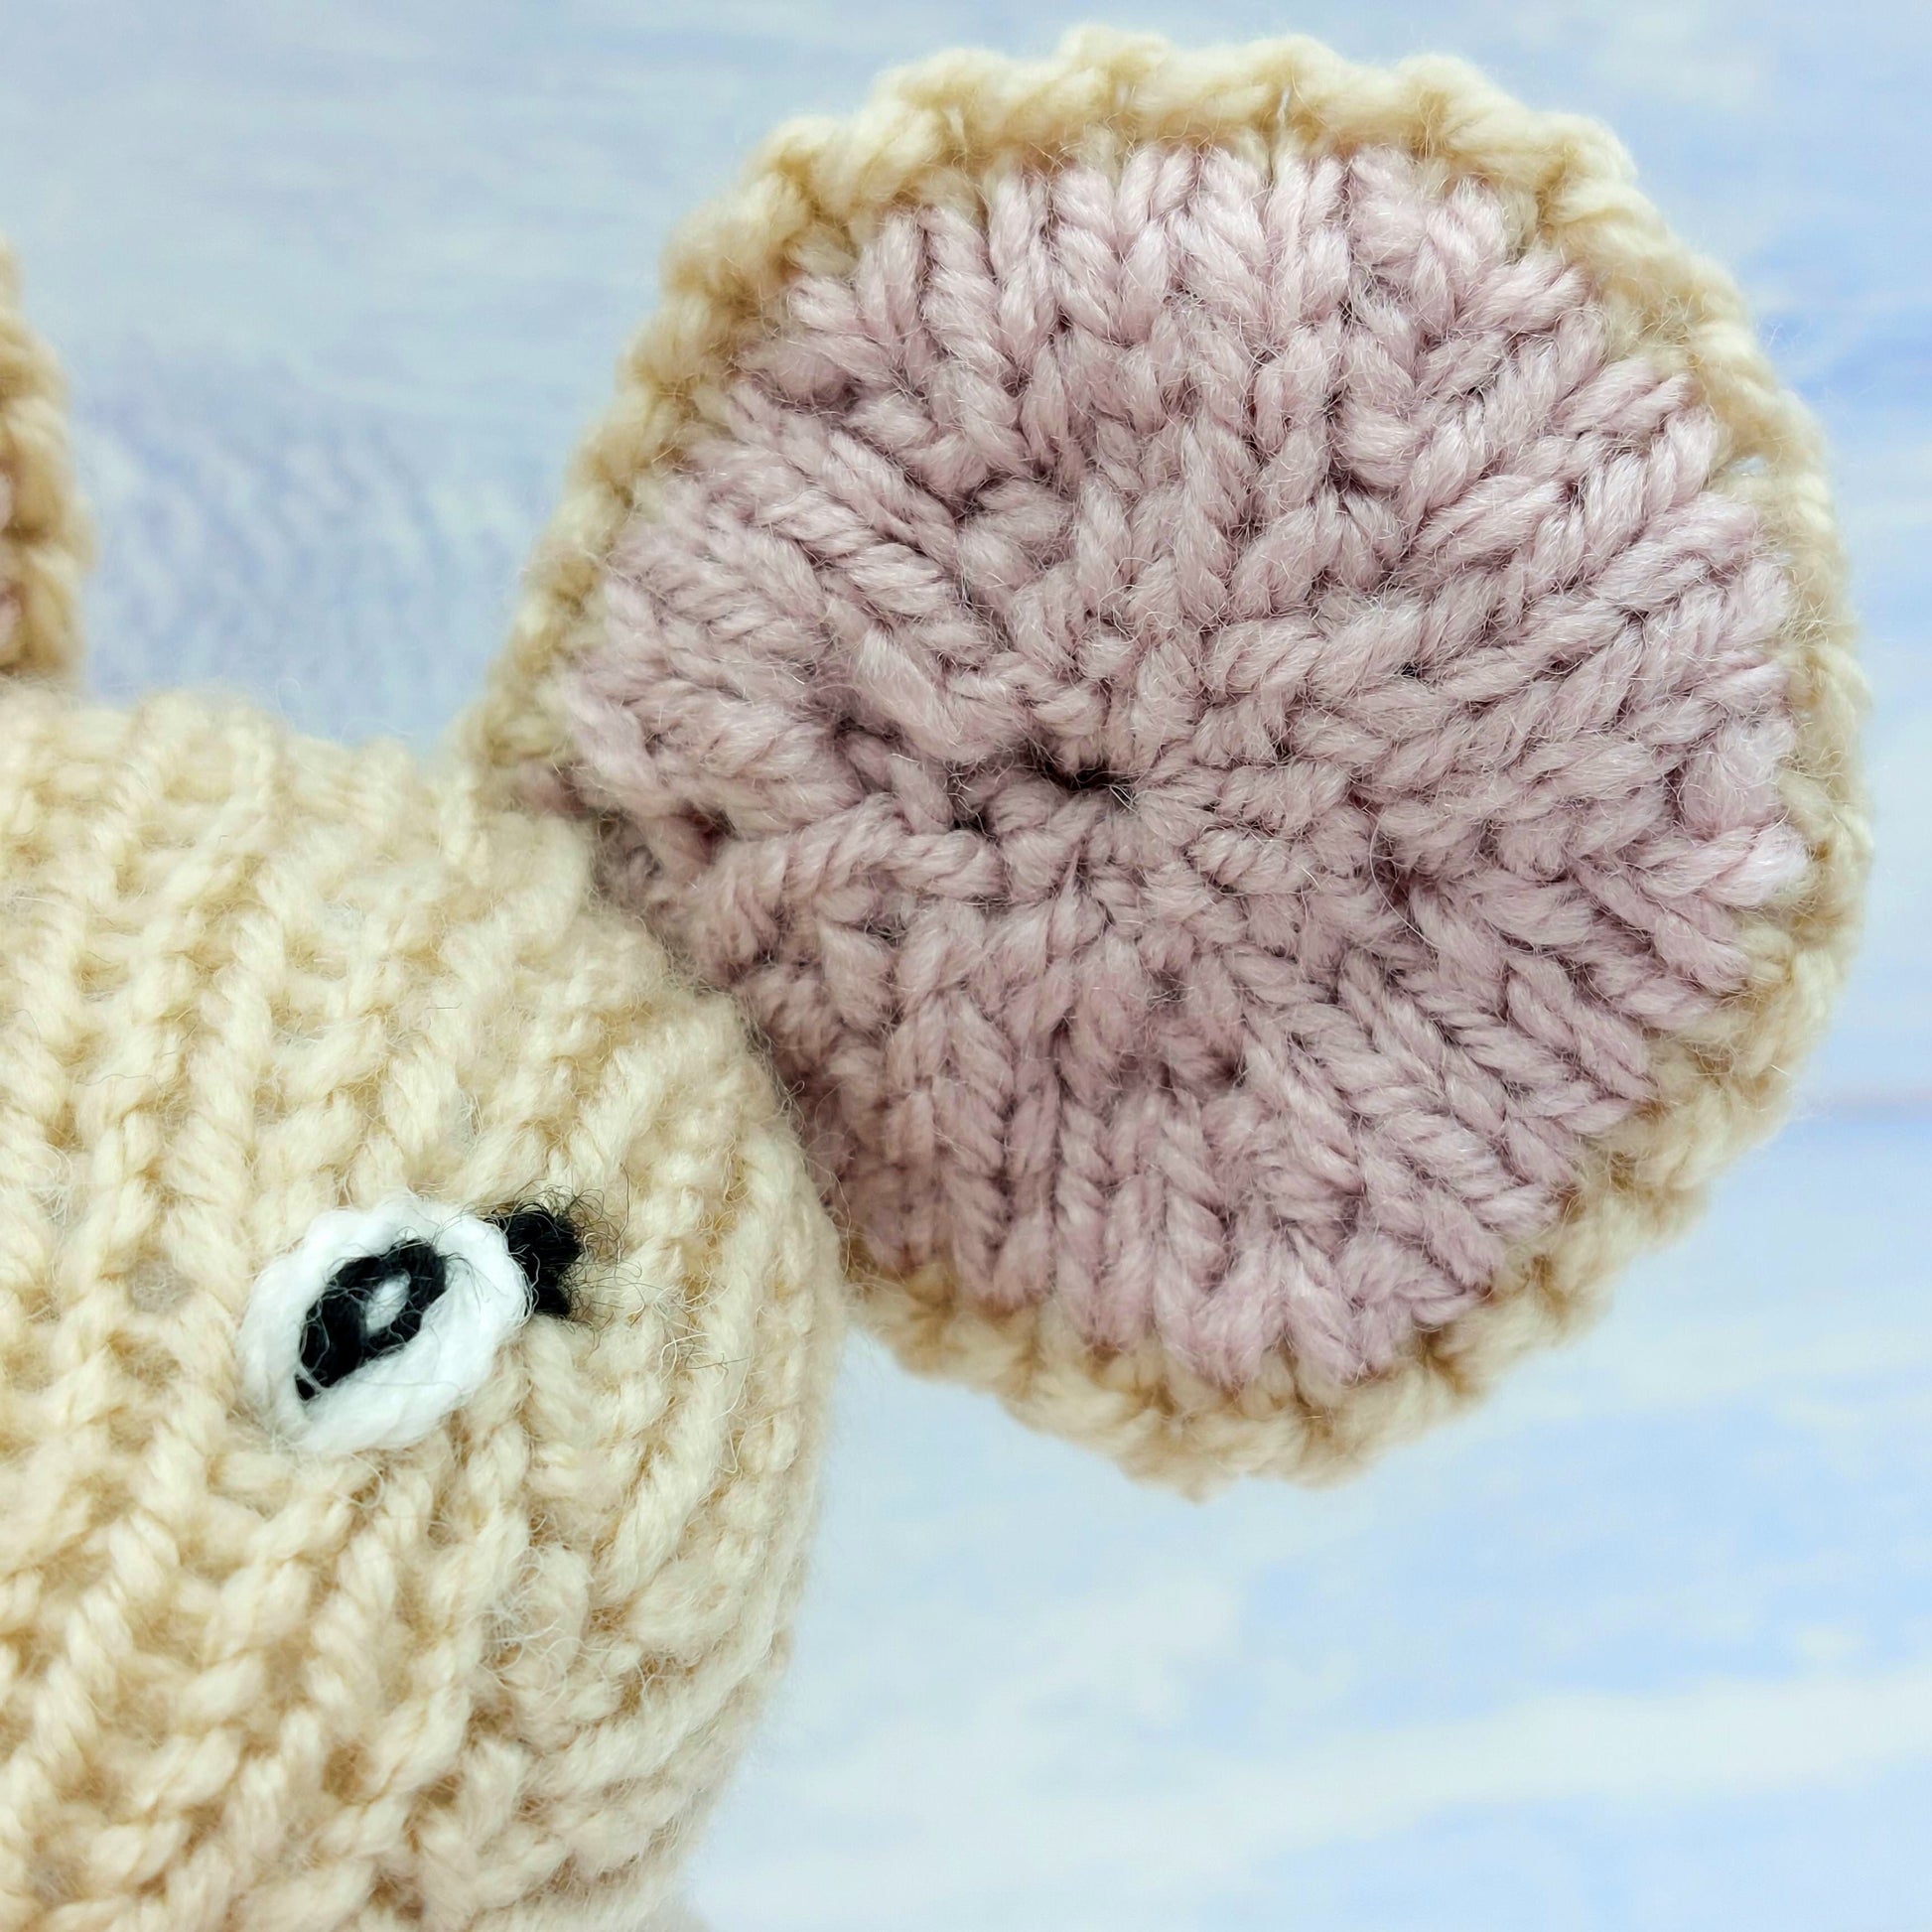 Close up of knitted mouse ear